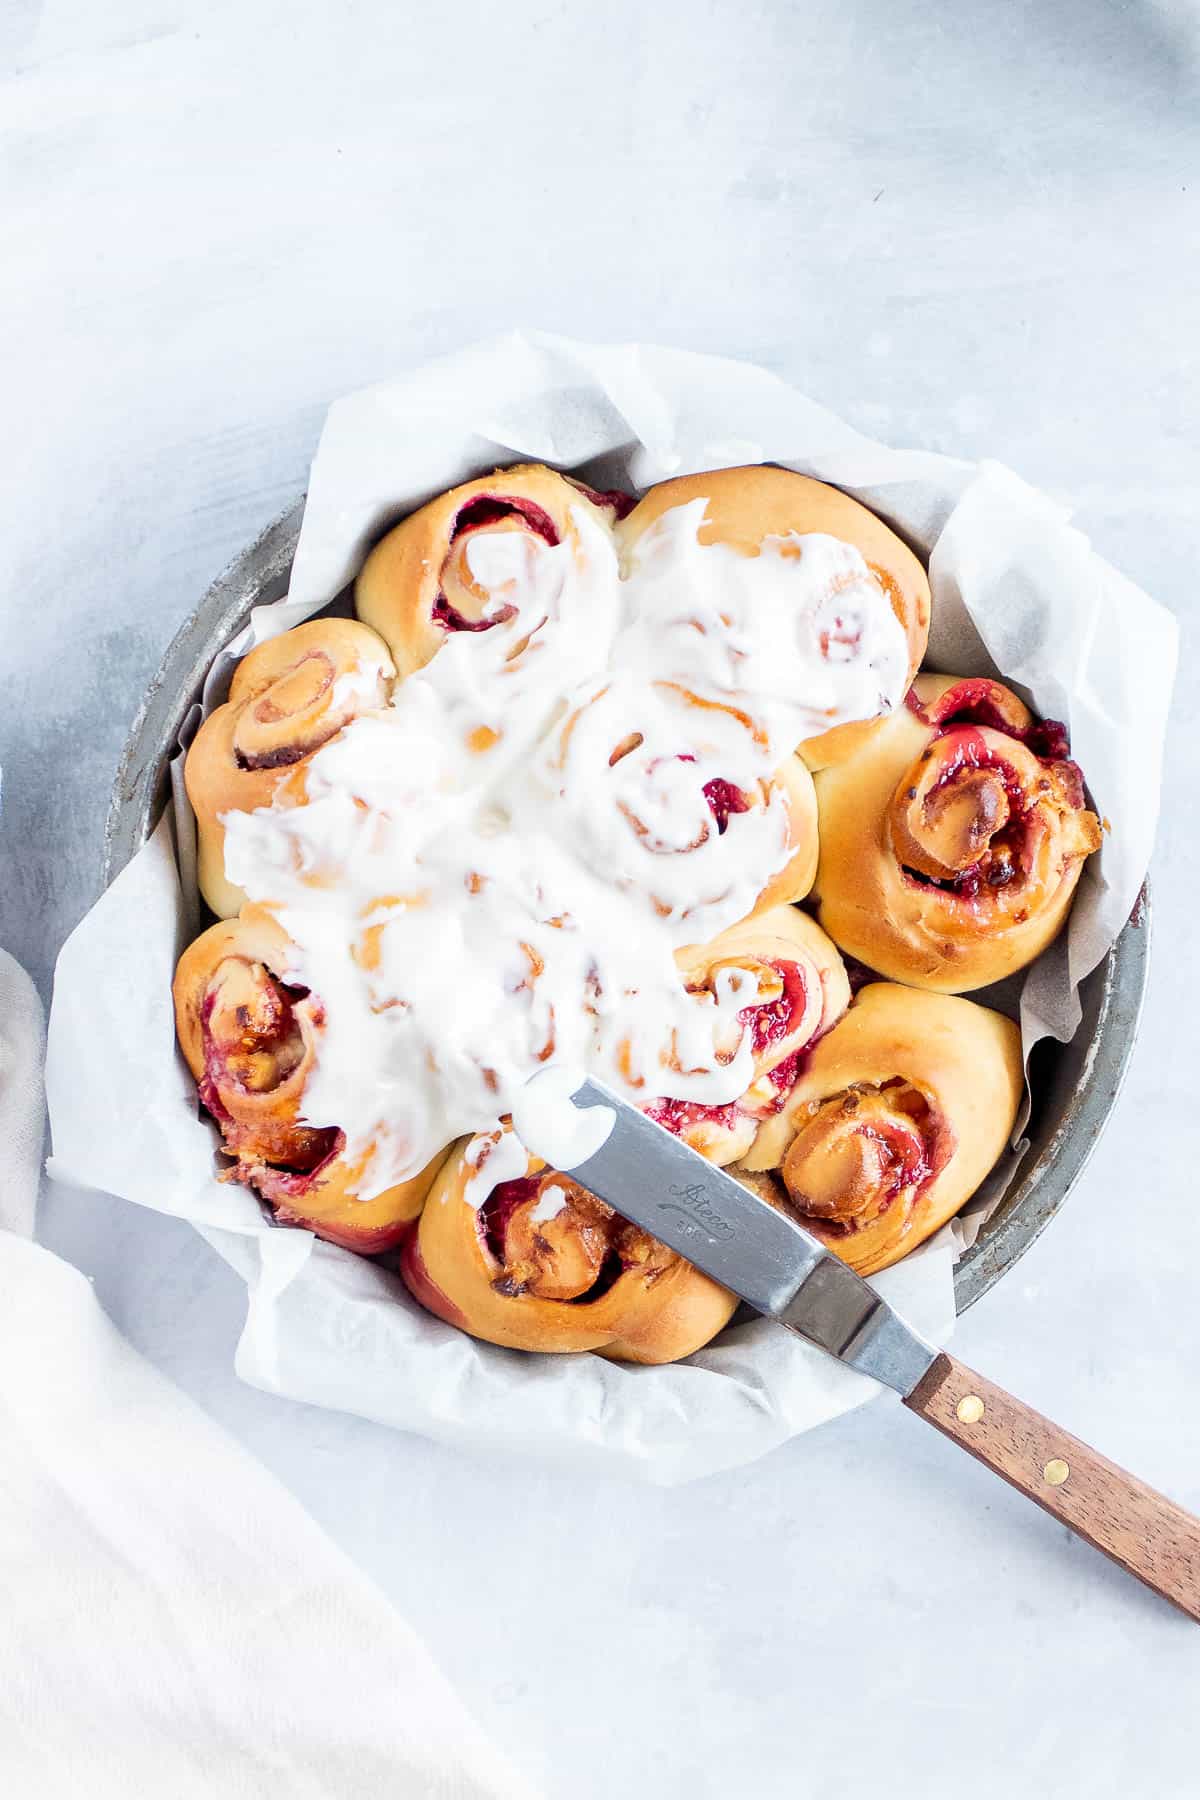 Overhead view of a round pan filled with lemon raspberry swirl rolls partly iced with white icing glaze